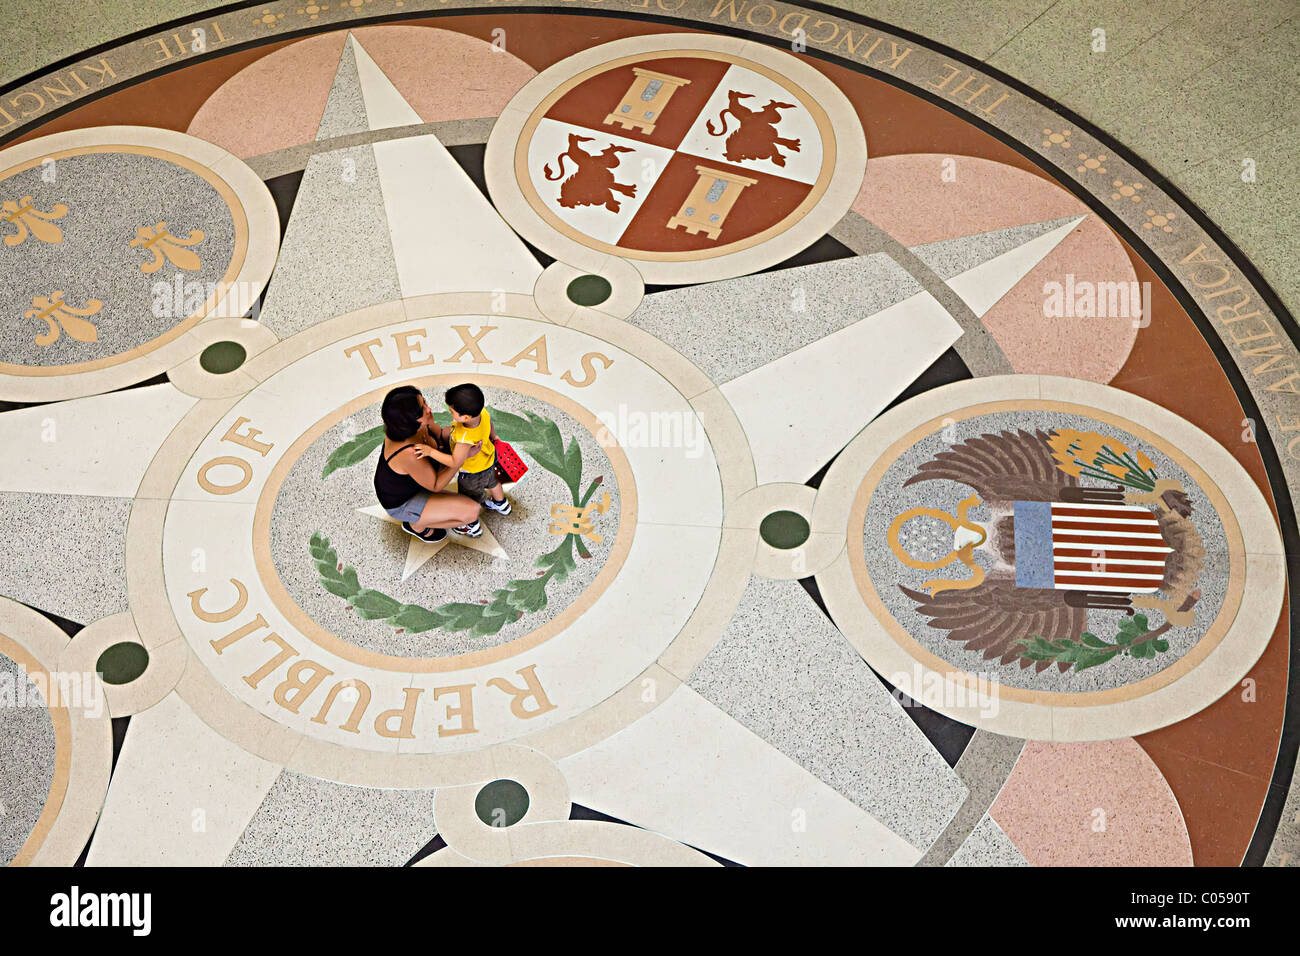 Woman and child standing on center star on floor of the Texas State Capitol Building Austin Texas USA Stock Photo